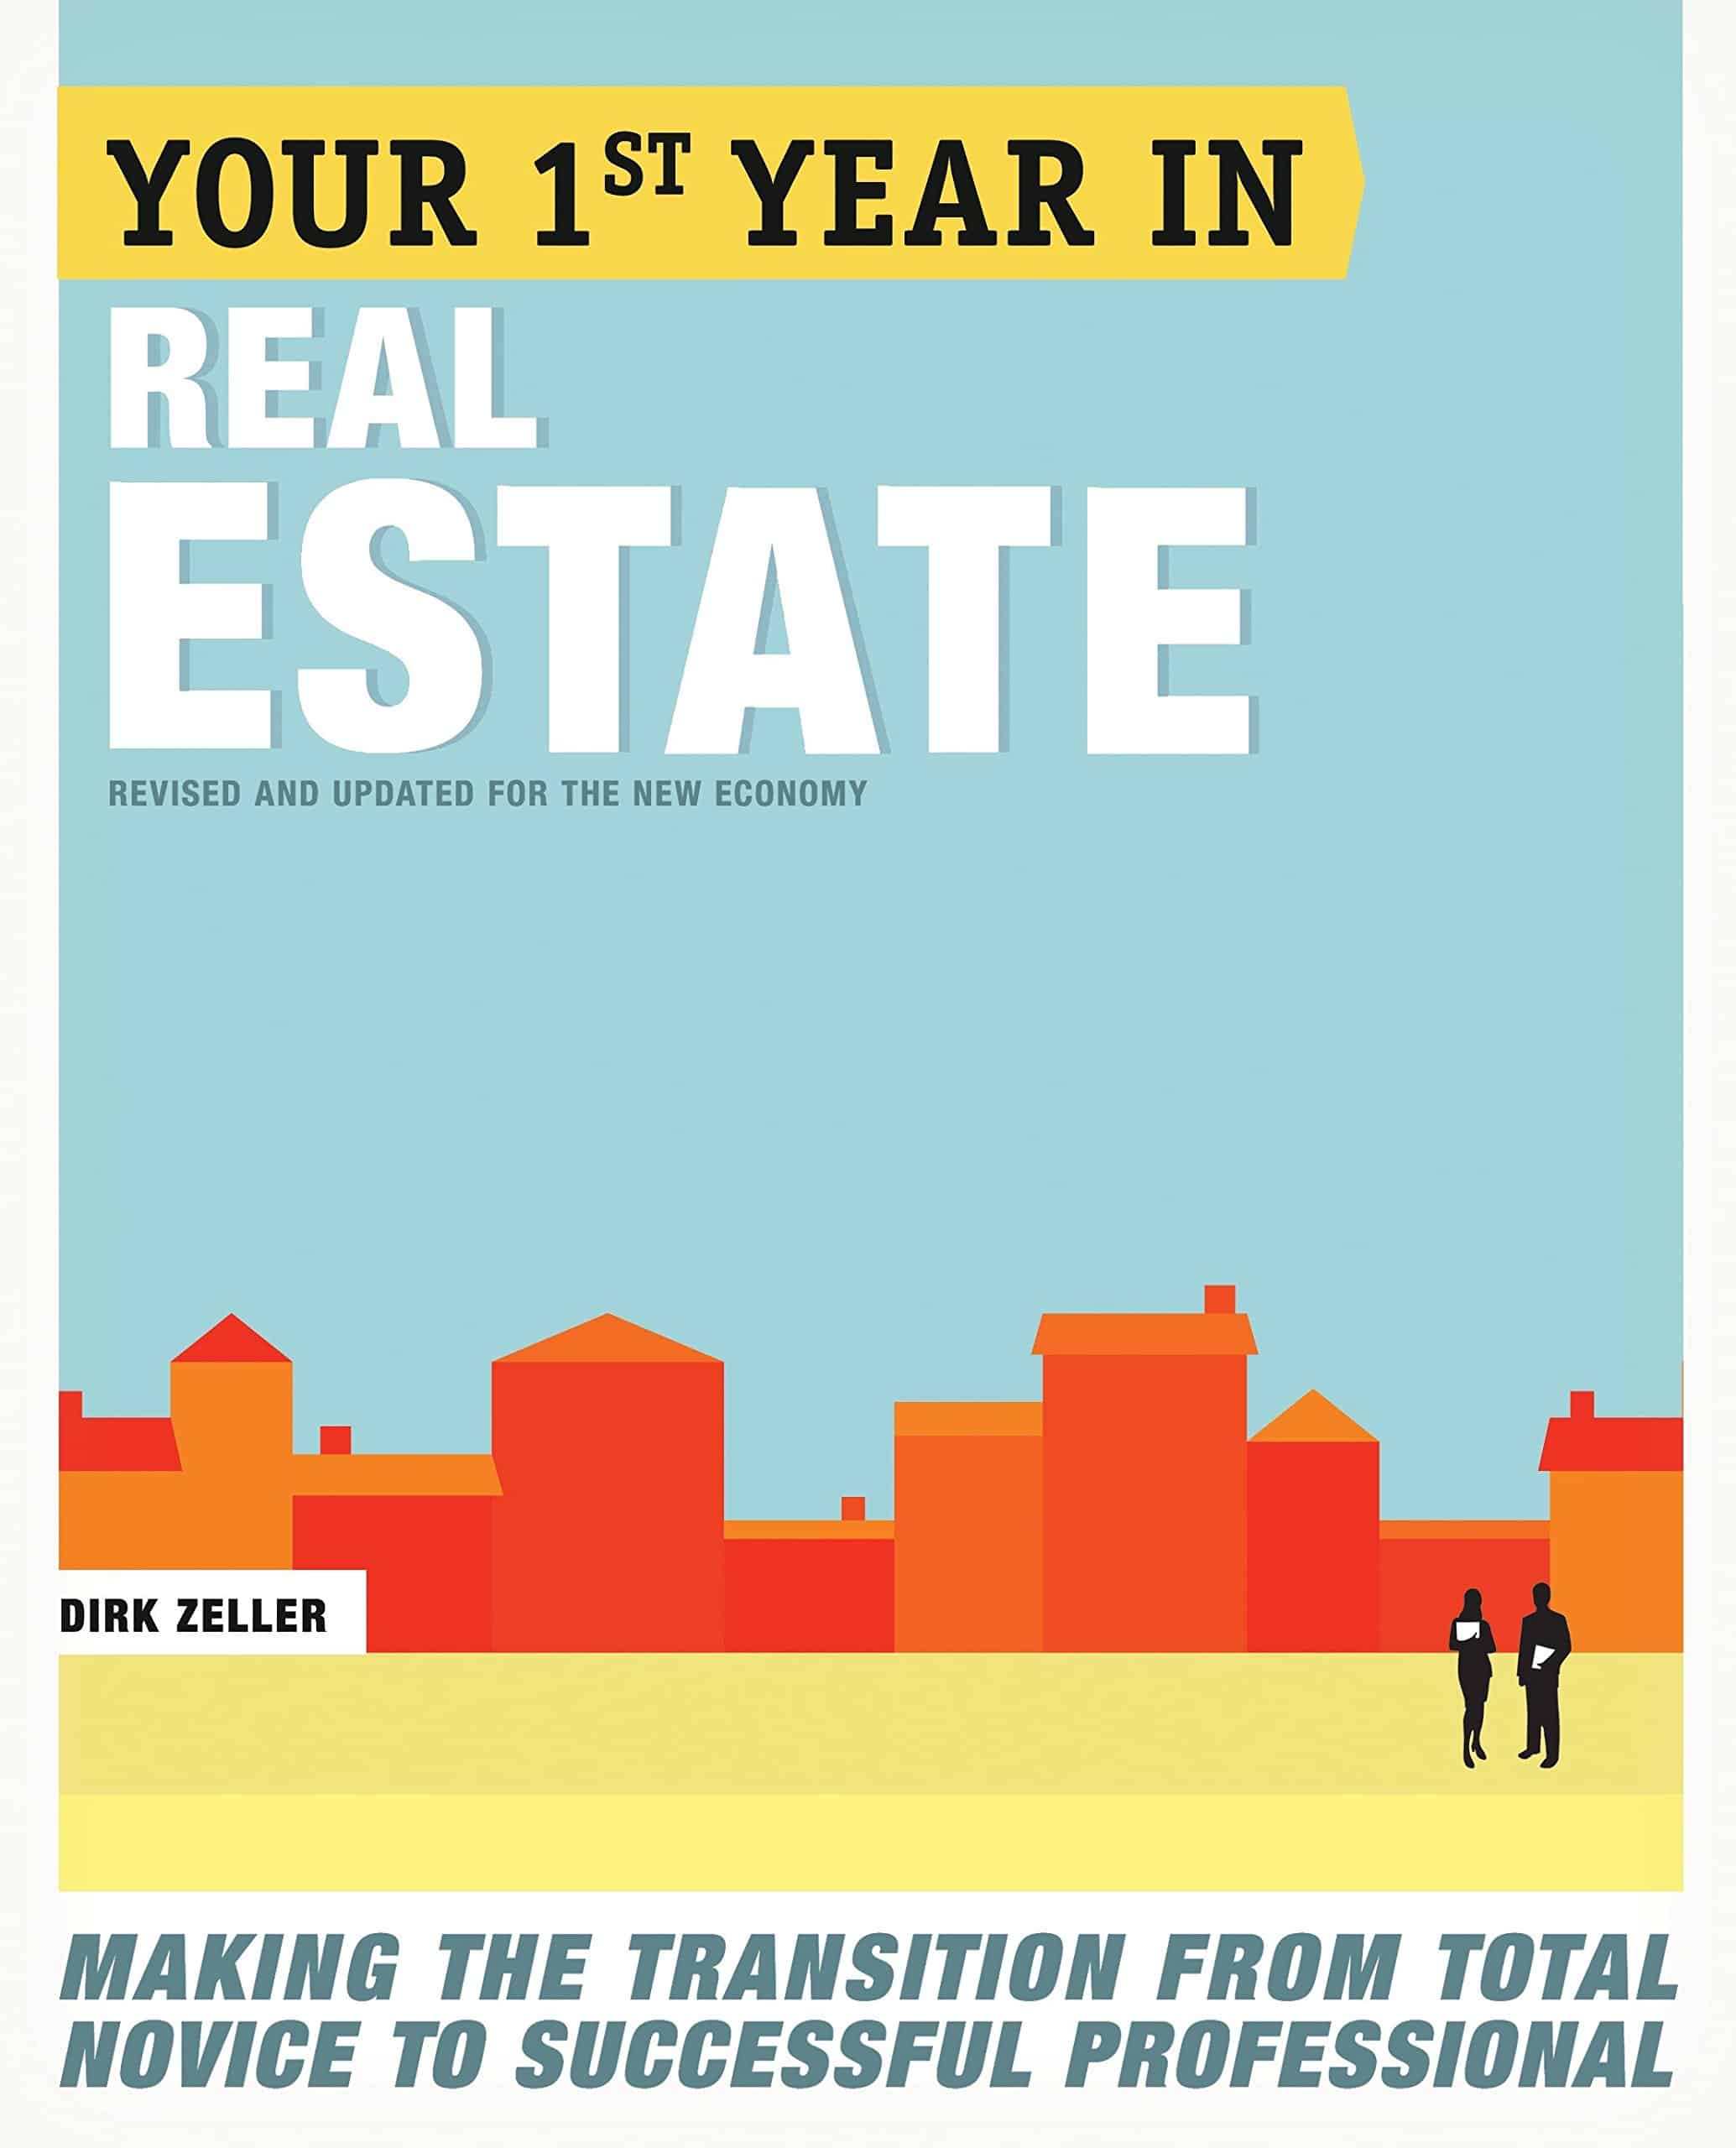 Your First Year in Real Estate, 2nd Ed.: Making the Transition From Total Novice to Successful Professional written by Dirk Zeller book cover